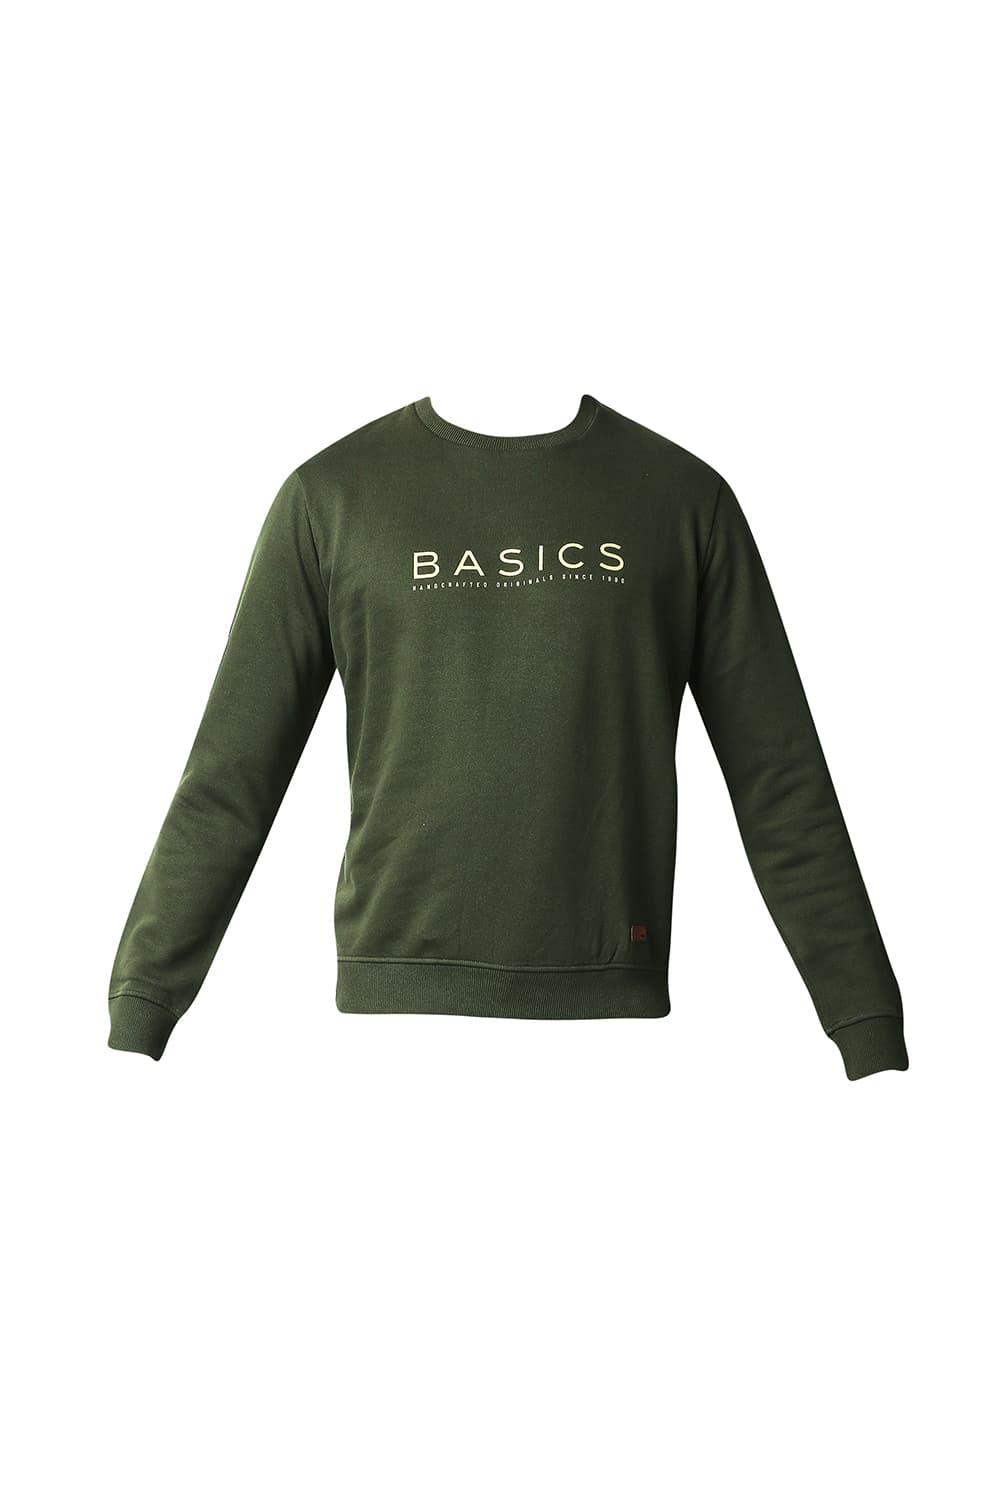 BASICS MUSCLE FIT BRUSHED FLEECE PULLOVER SWEATER